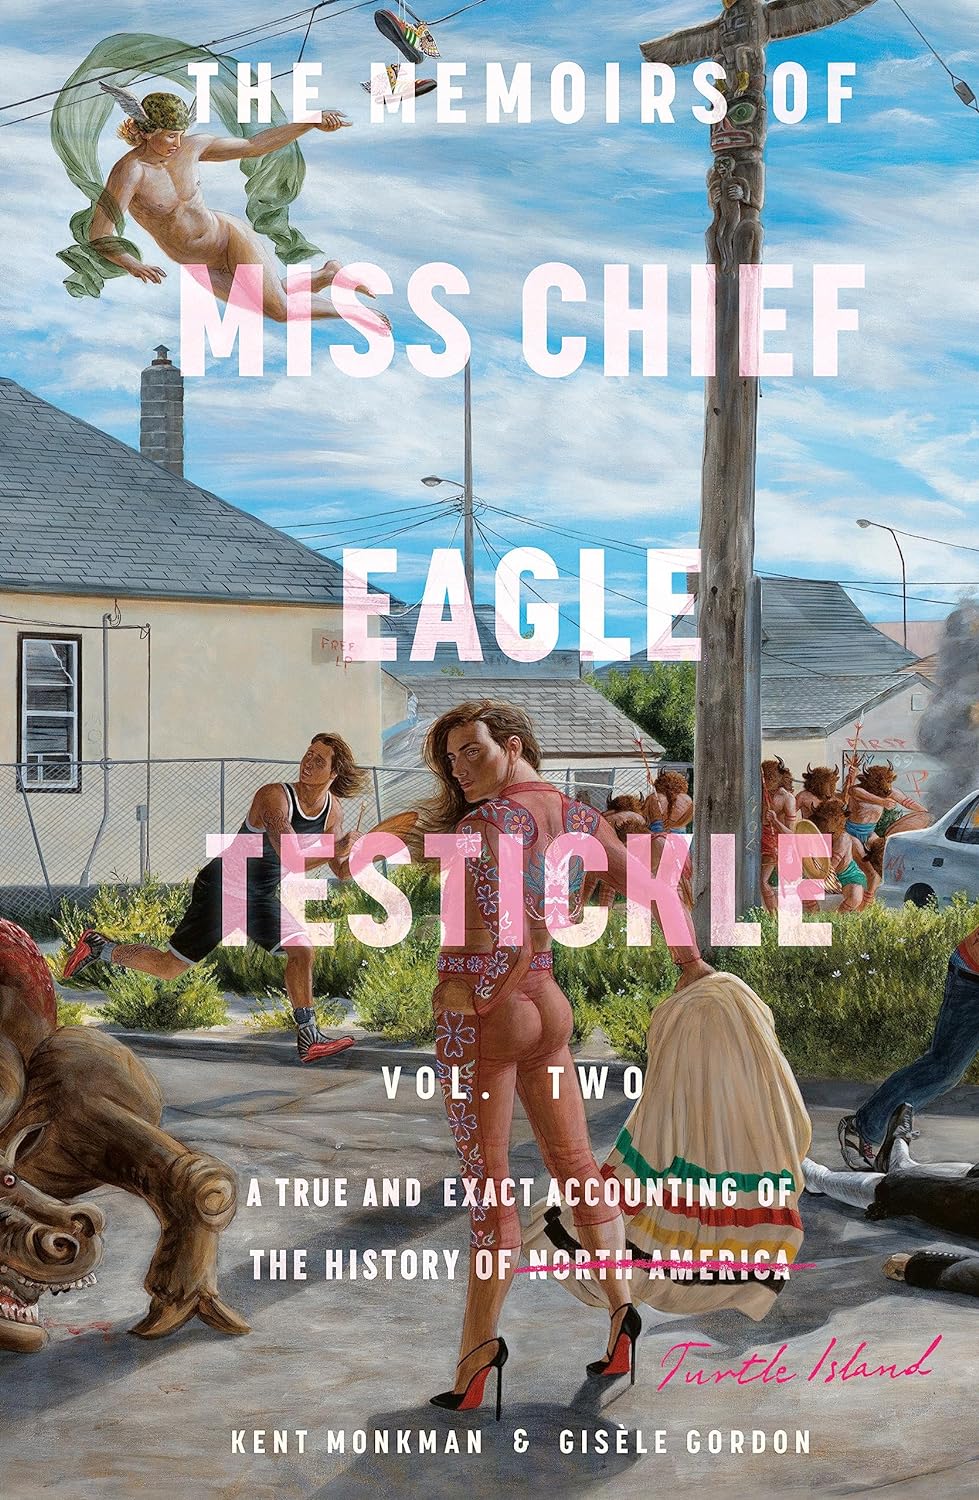 The Memoirs of Miss Chief Testickle Vol. Two